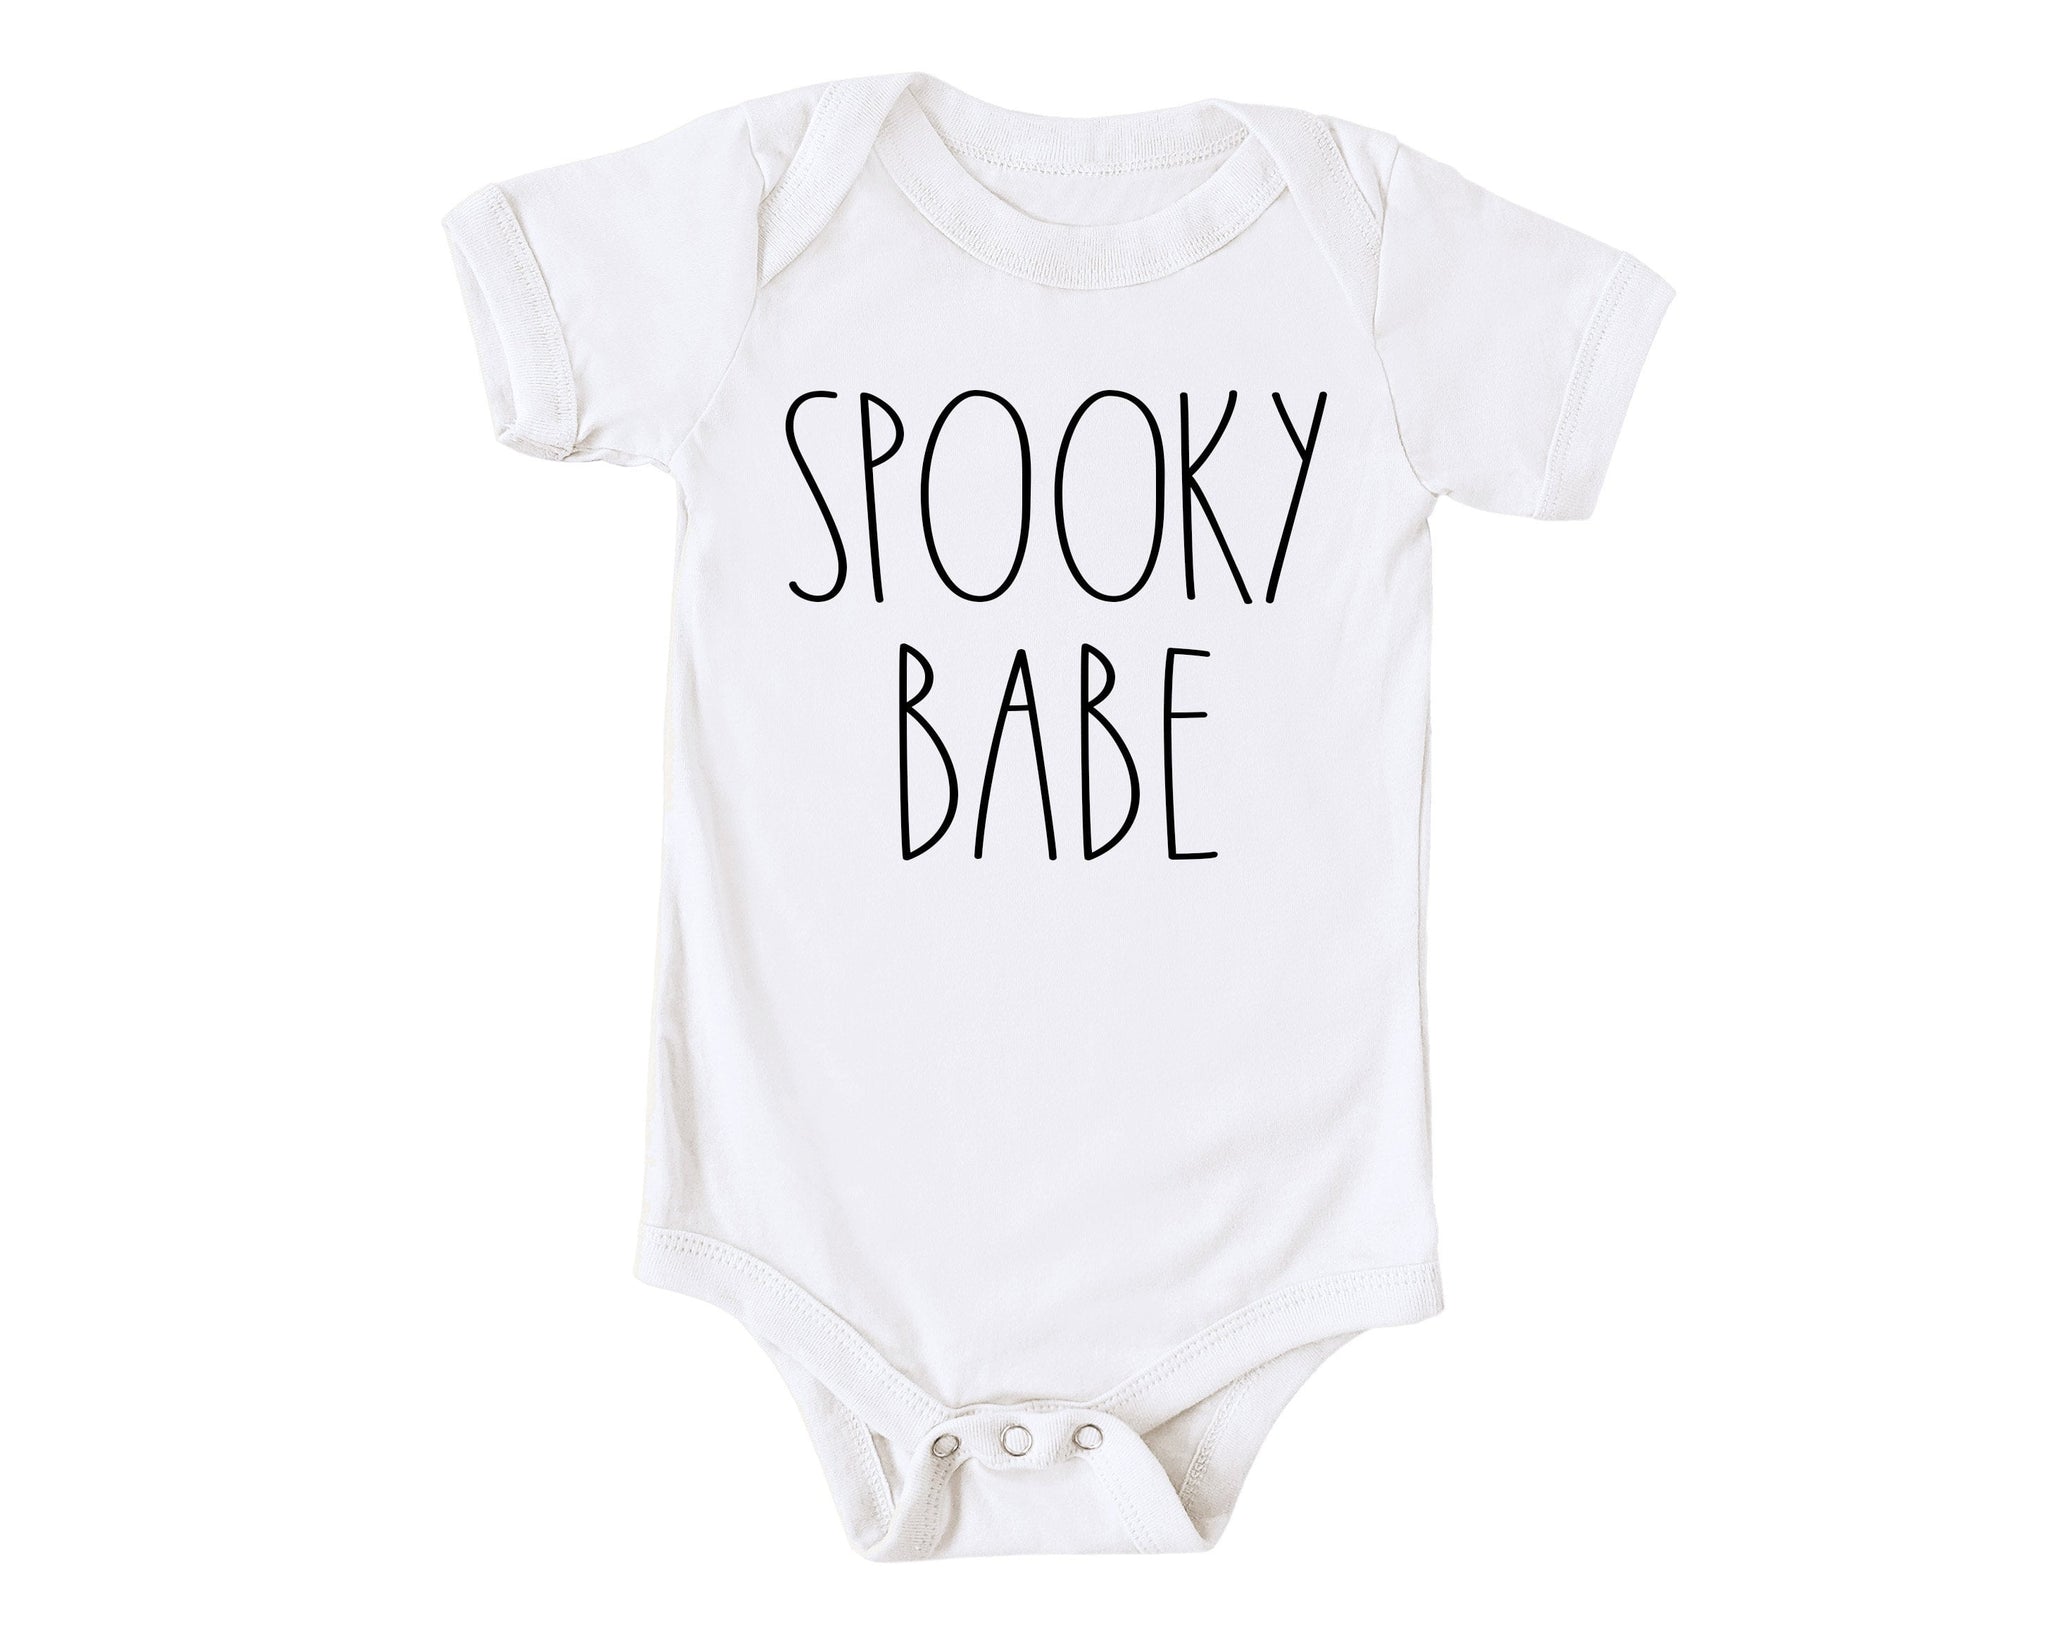 First Halloween Outfit | Spooky Babe Shirt | Ollie + Hank